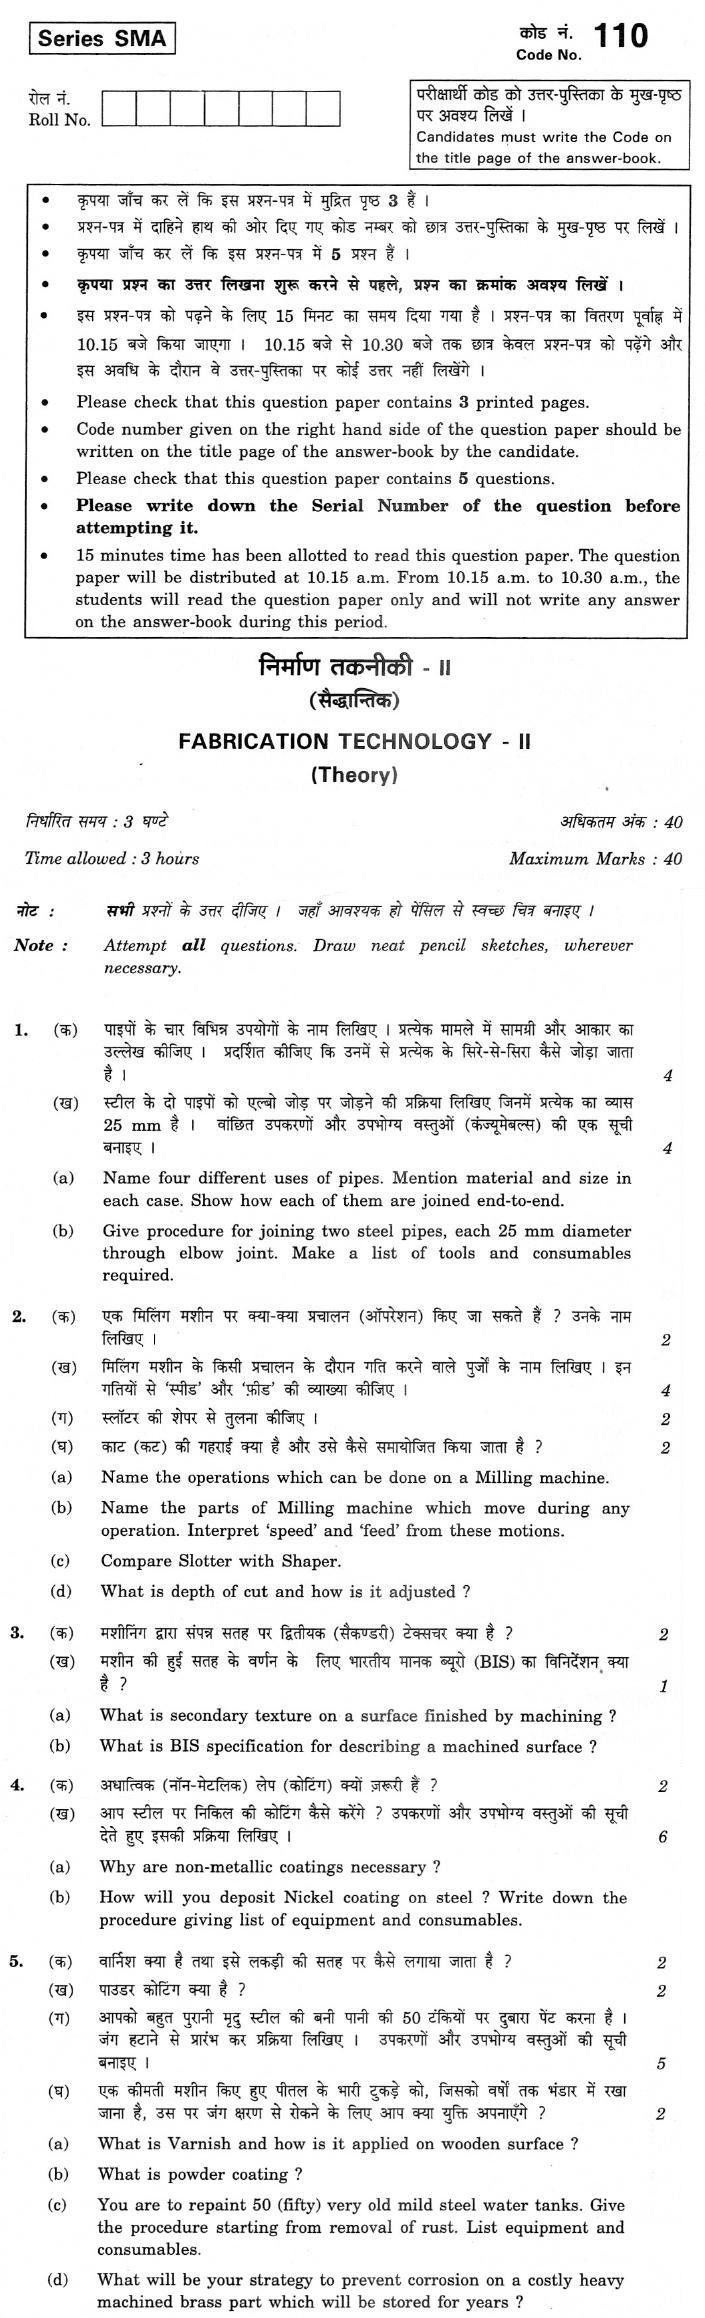 CBSE Class XII Previous Year Question Paper 2012 Fabrication Technology-II